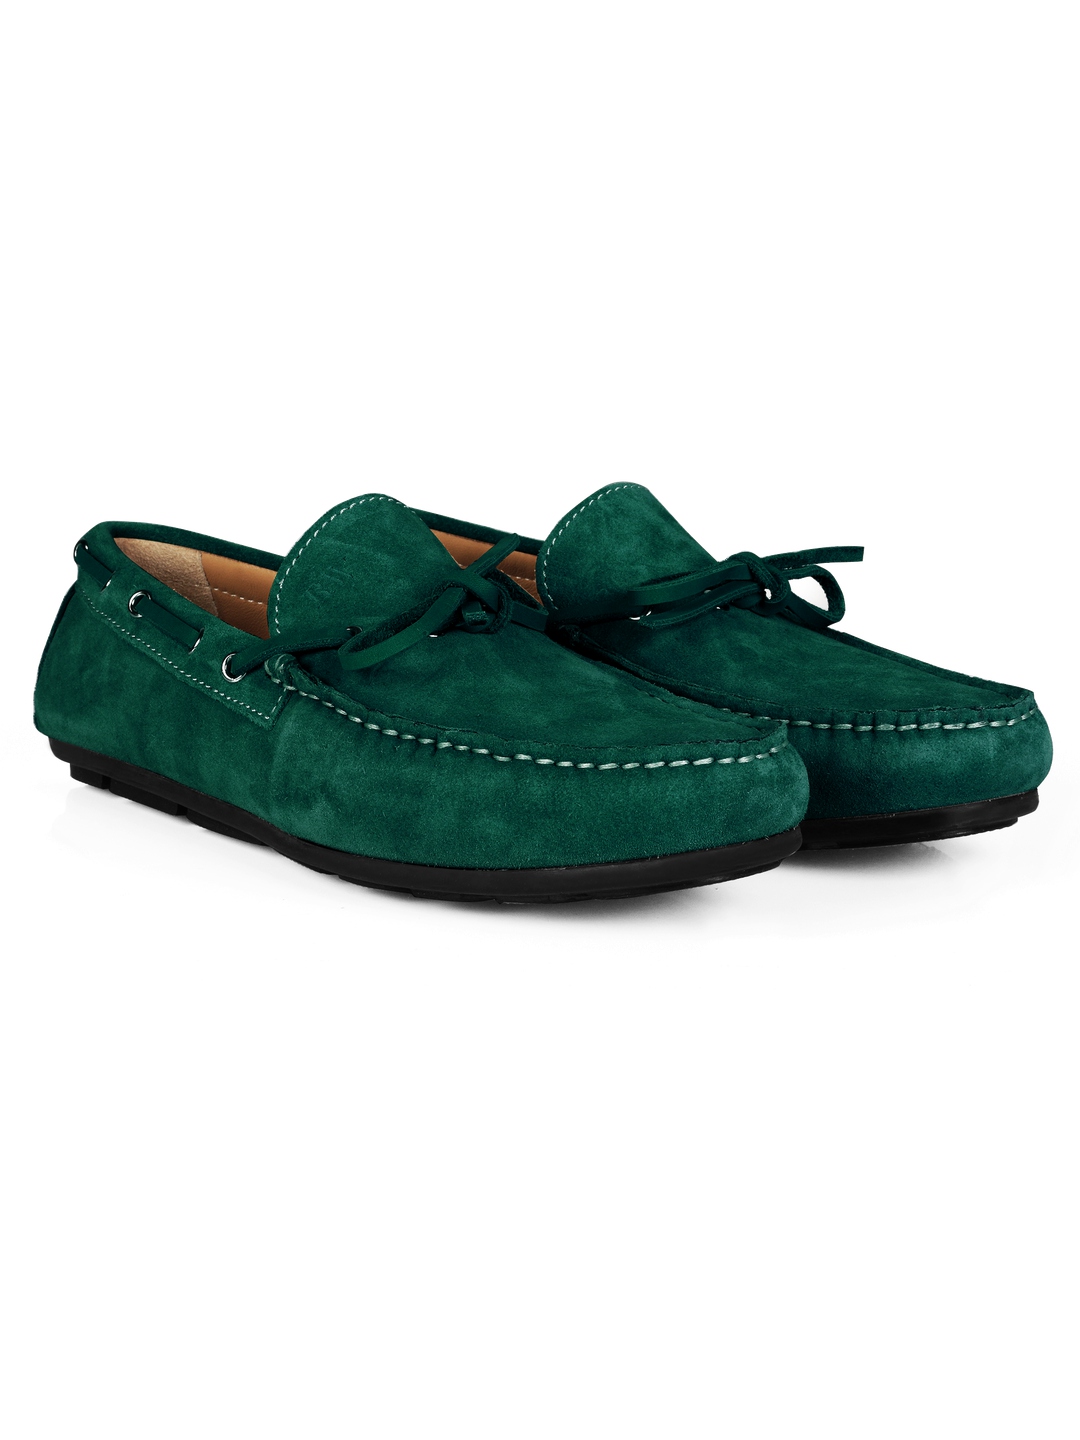 Green Boat Moccasins Leather Shoes leather shoes for men | Rapawalk